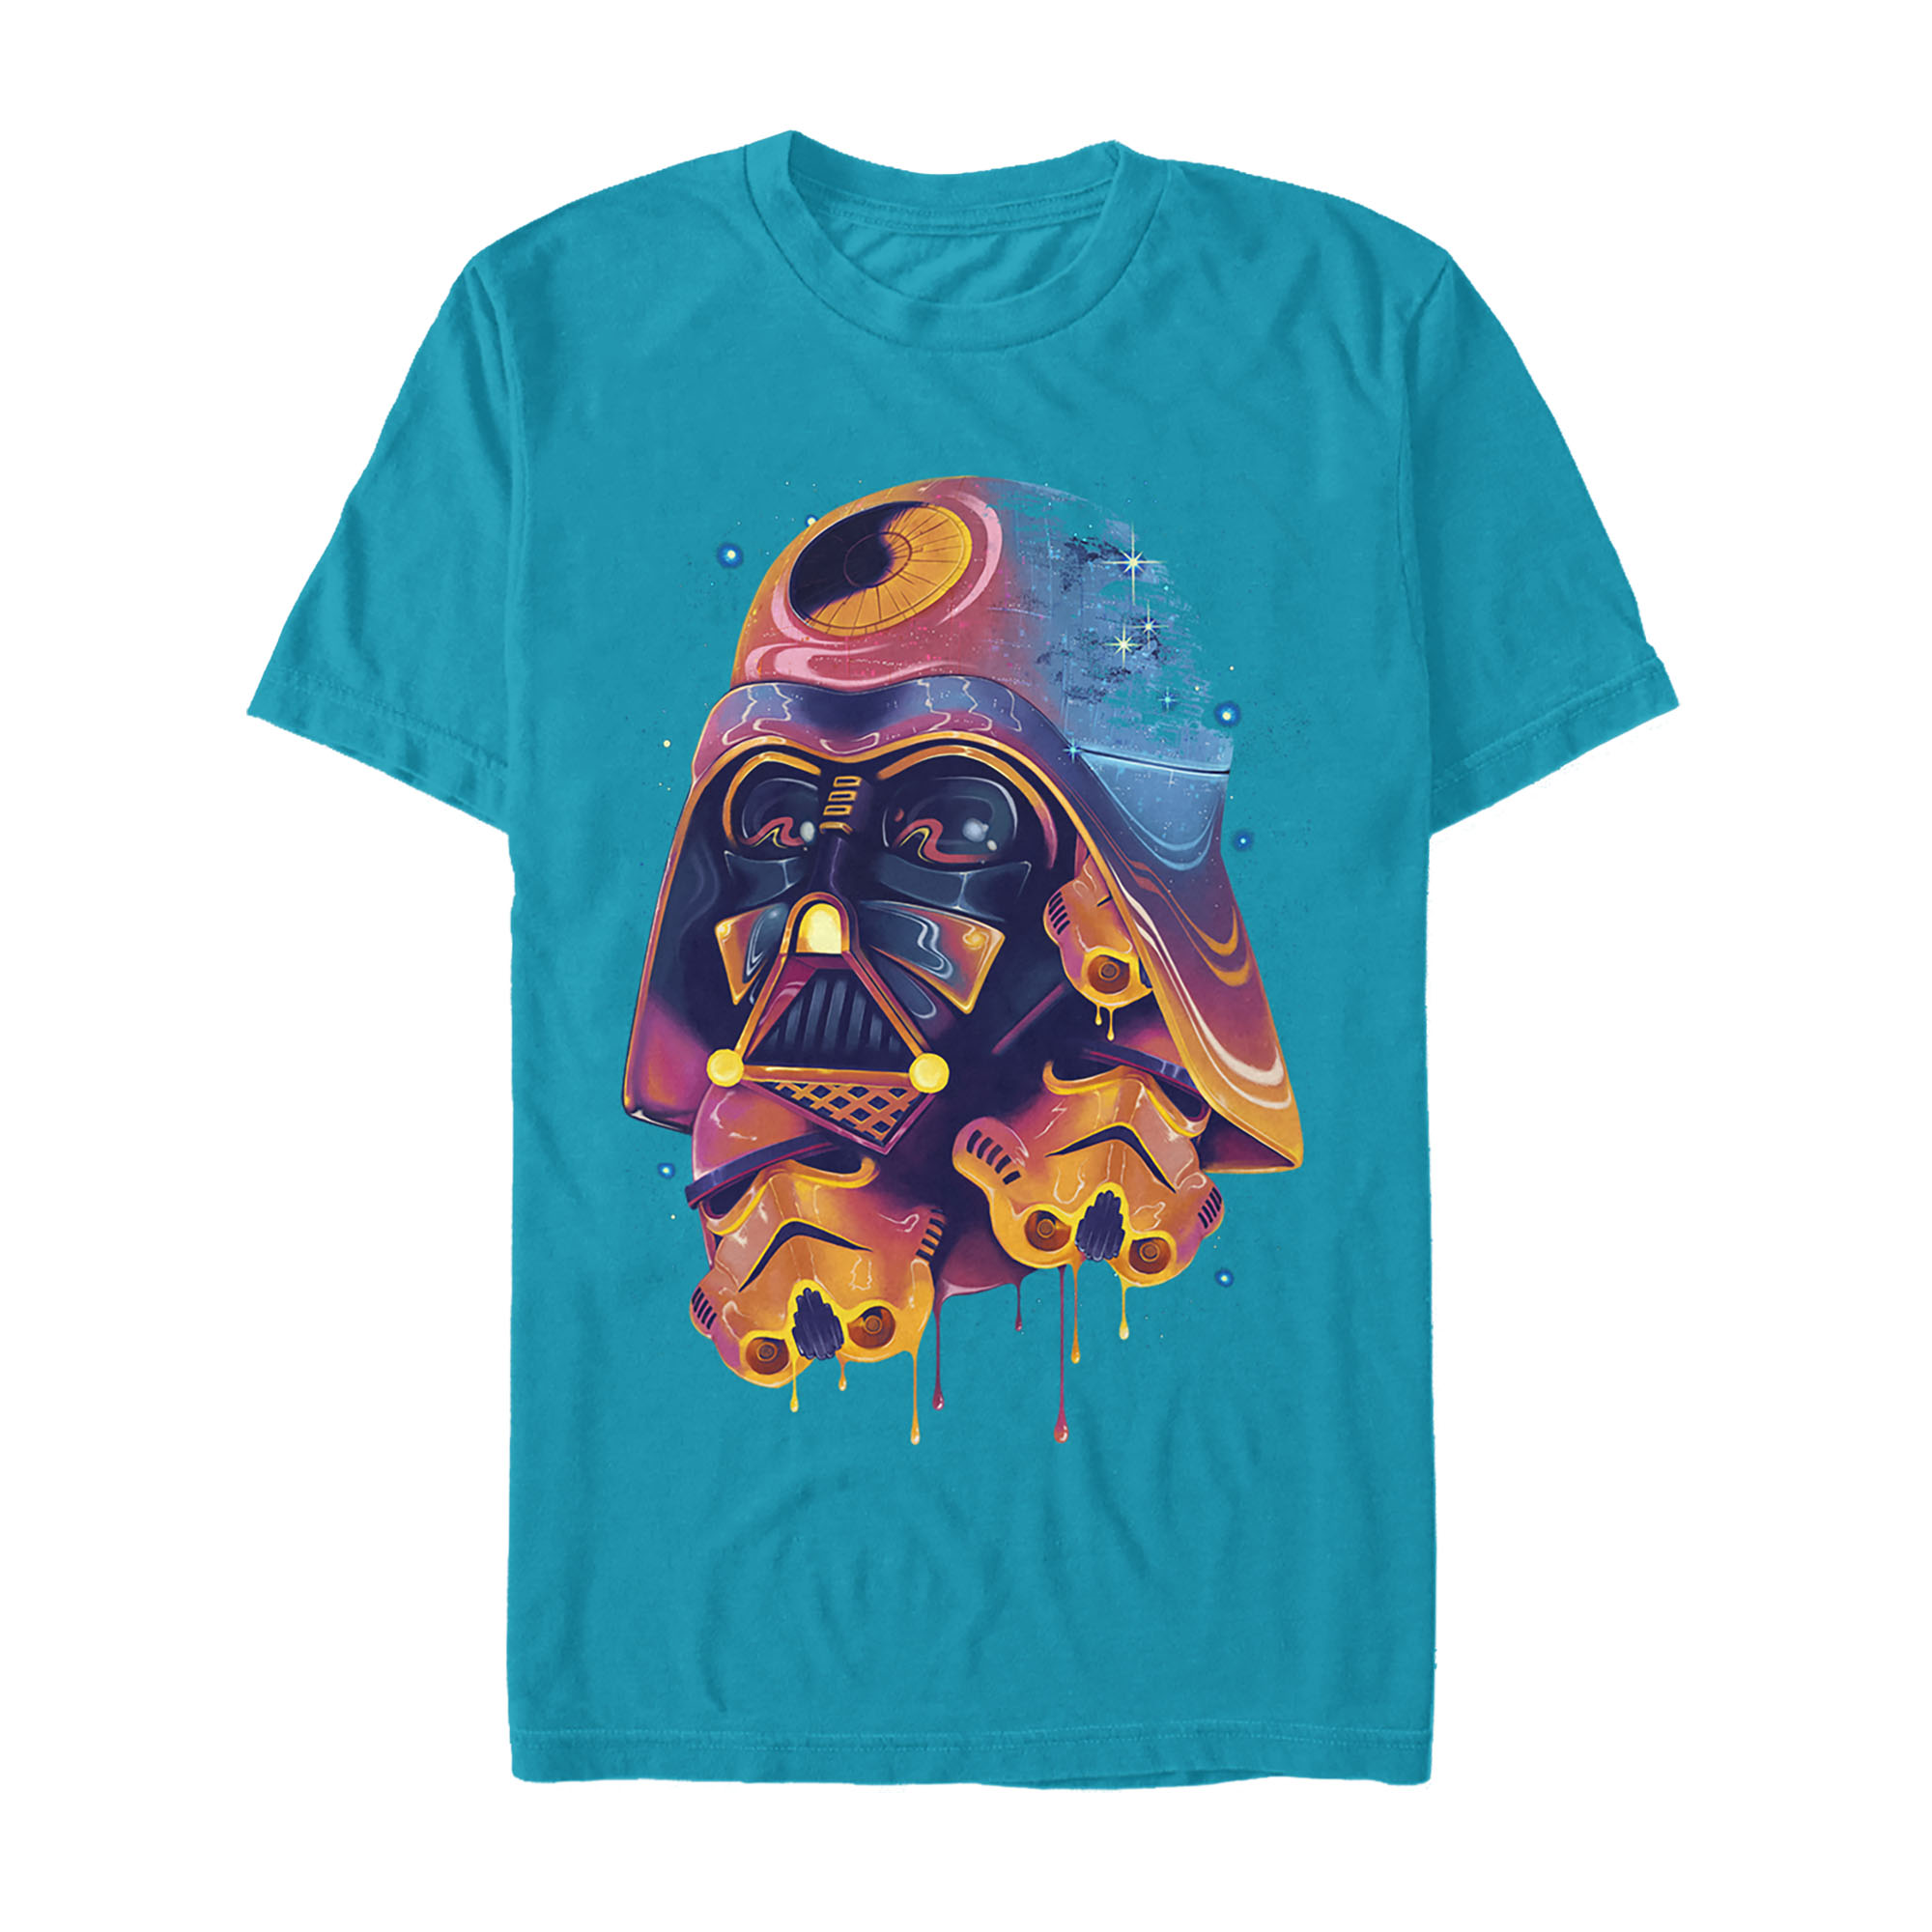 Men's Star Wars Psychedelic Darth Vader  Graphic Tee Turquoise 3X Large - image 1 of 4